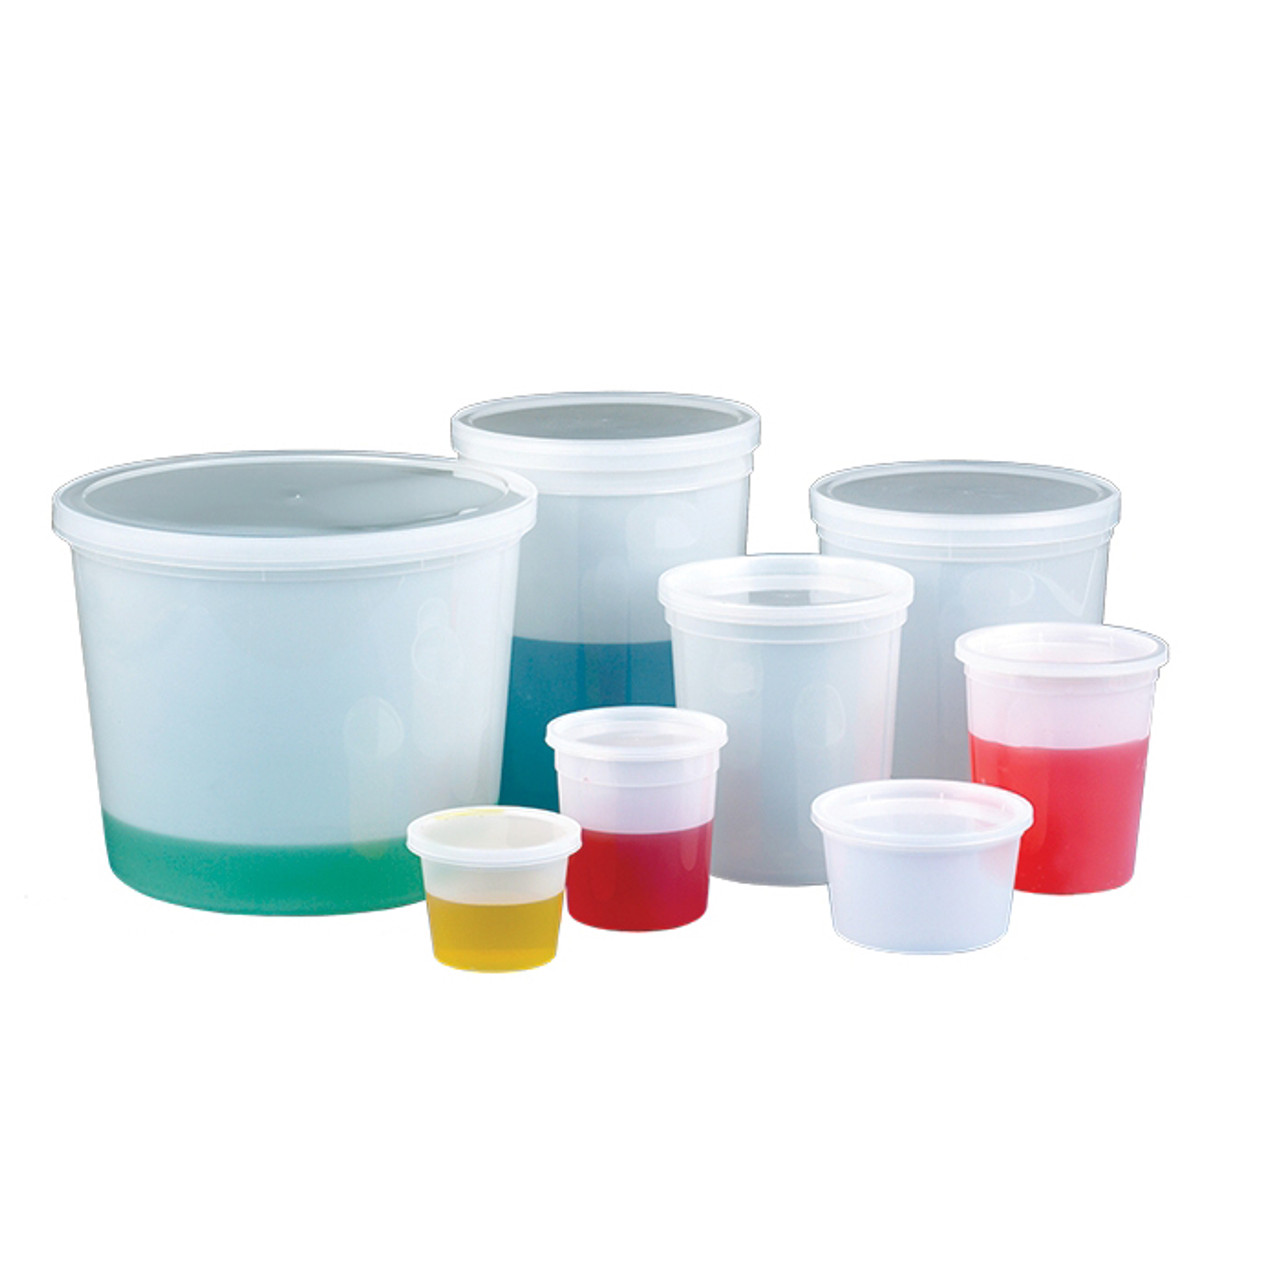 4oz (120mL) Polypropylene Translucent Storage Container with Snap